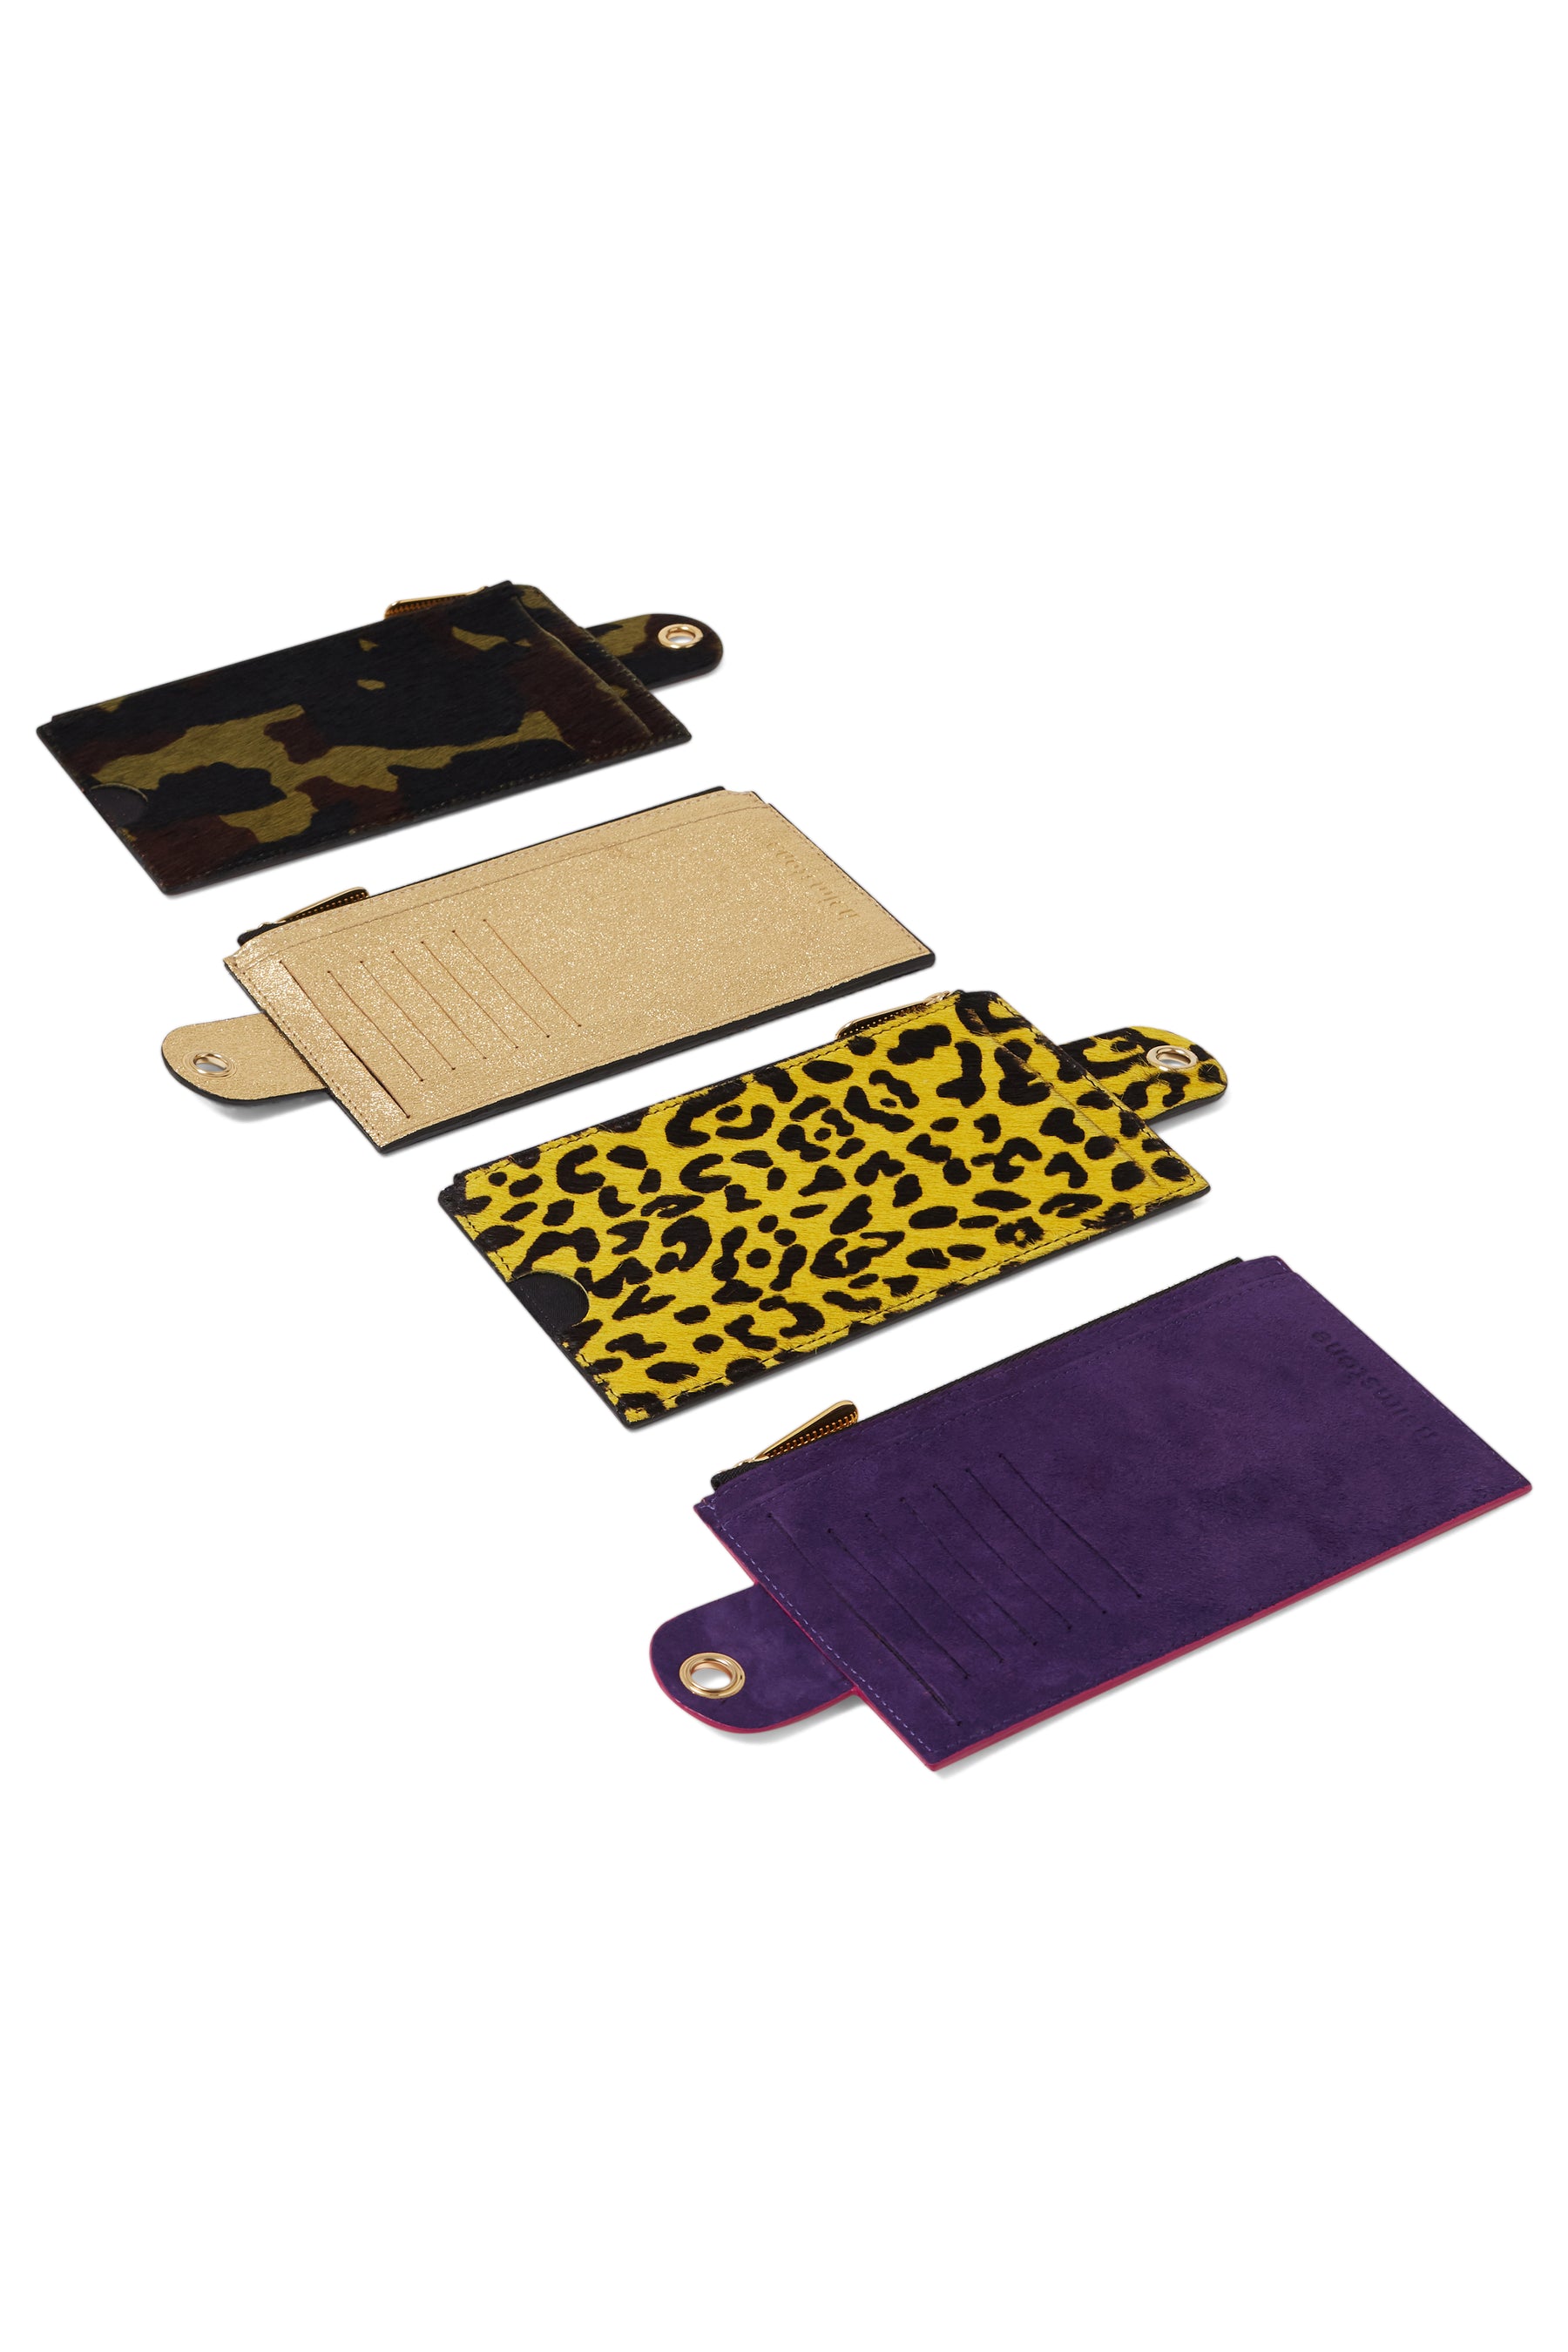 The Minis - Large neck wallet in Orange & Purple suede